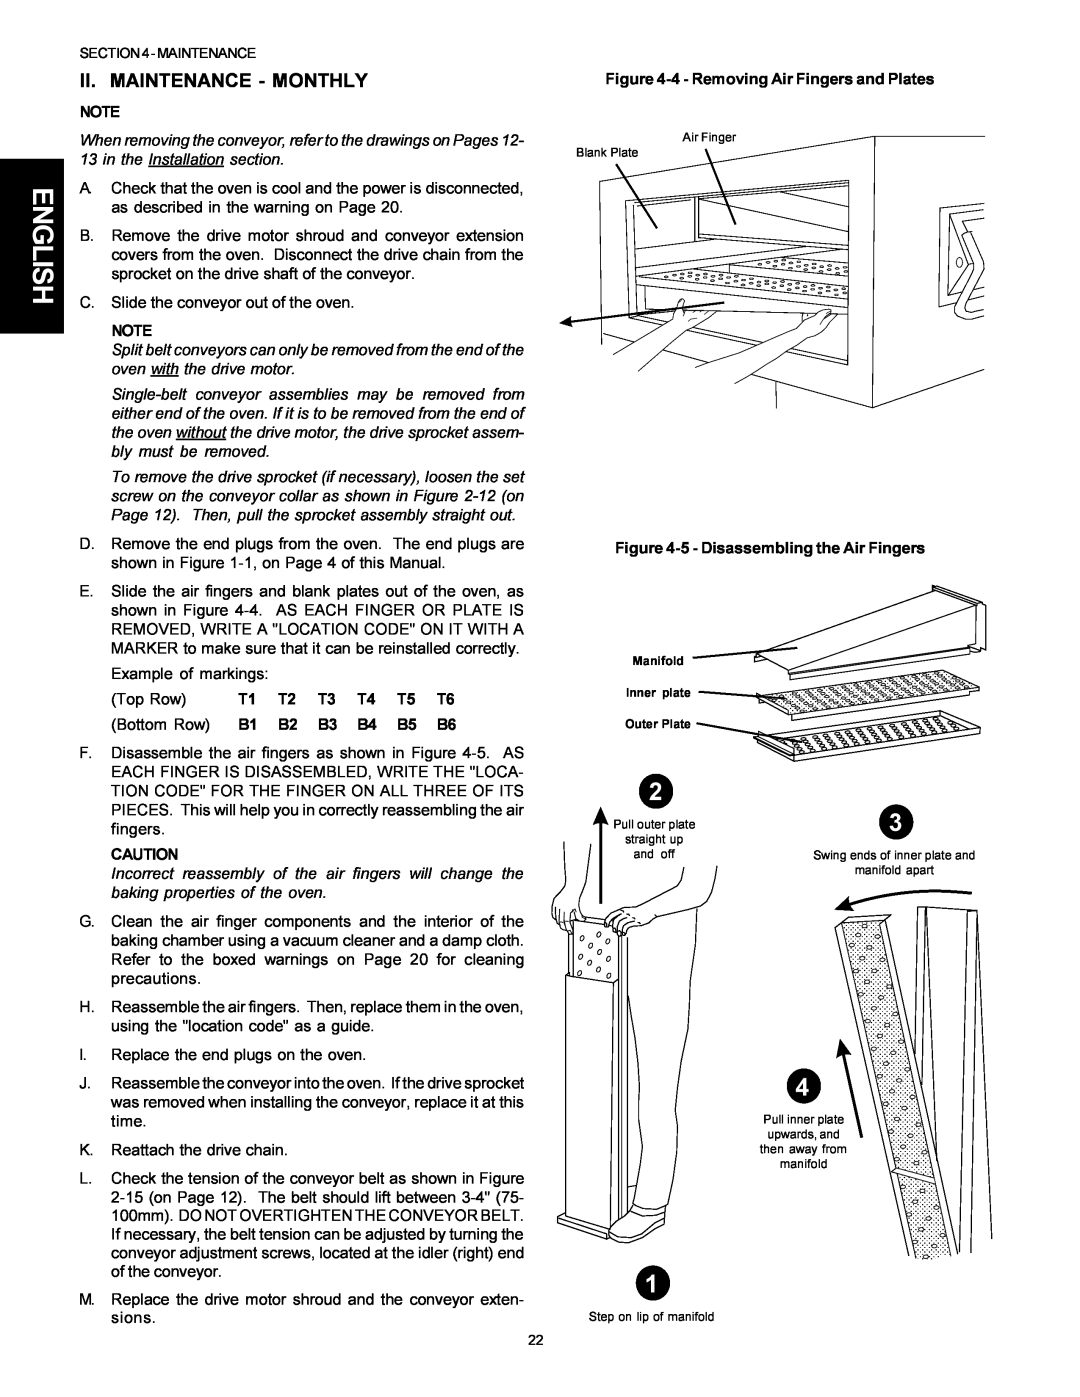 Middleby Marshall PS300F installation manual English, Ii. Maintenance - Monthly, 4- Removing Air Fingers and Plates 